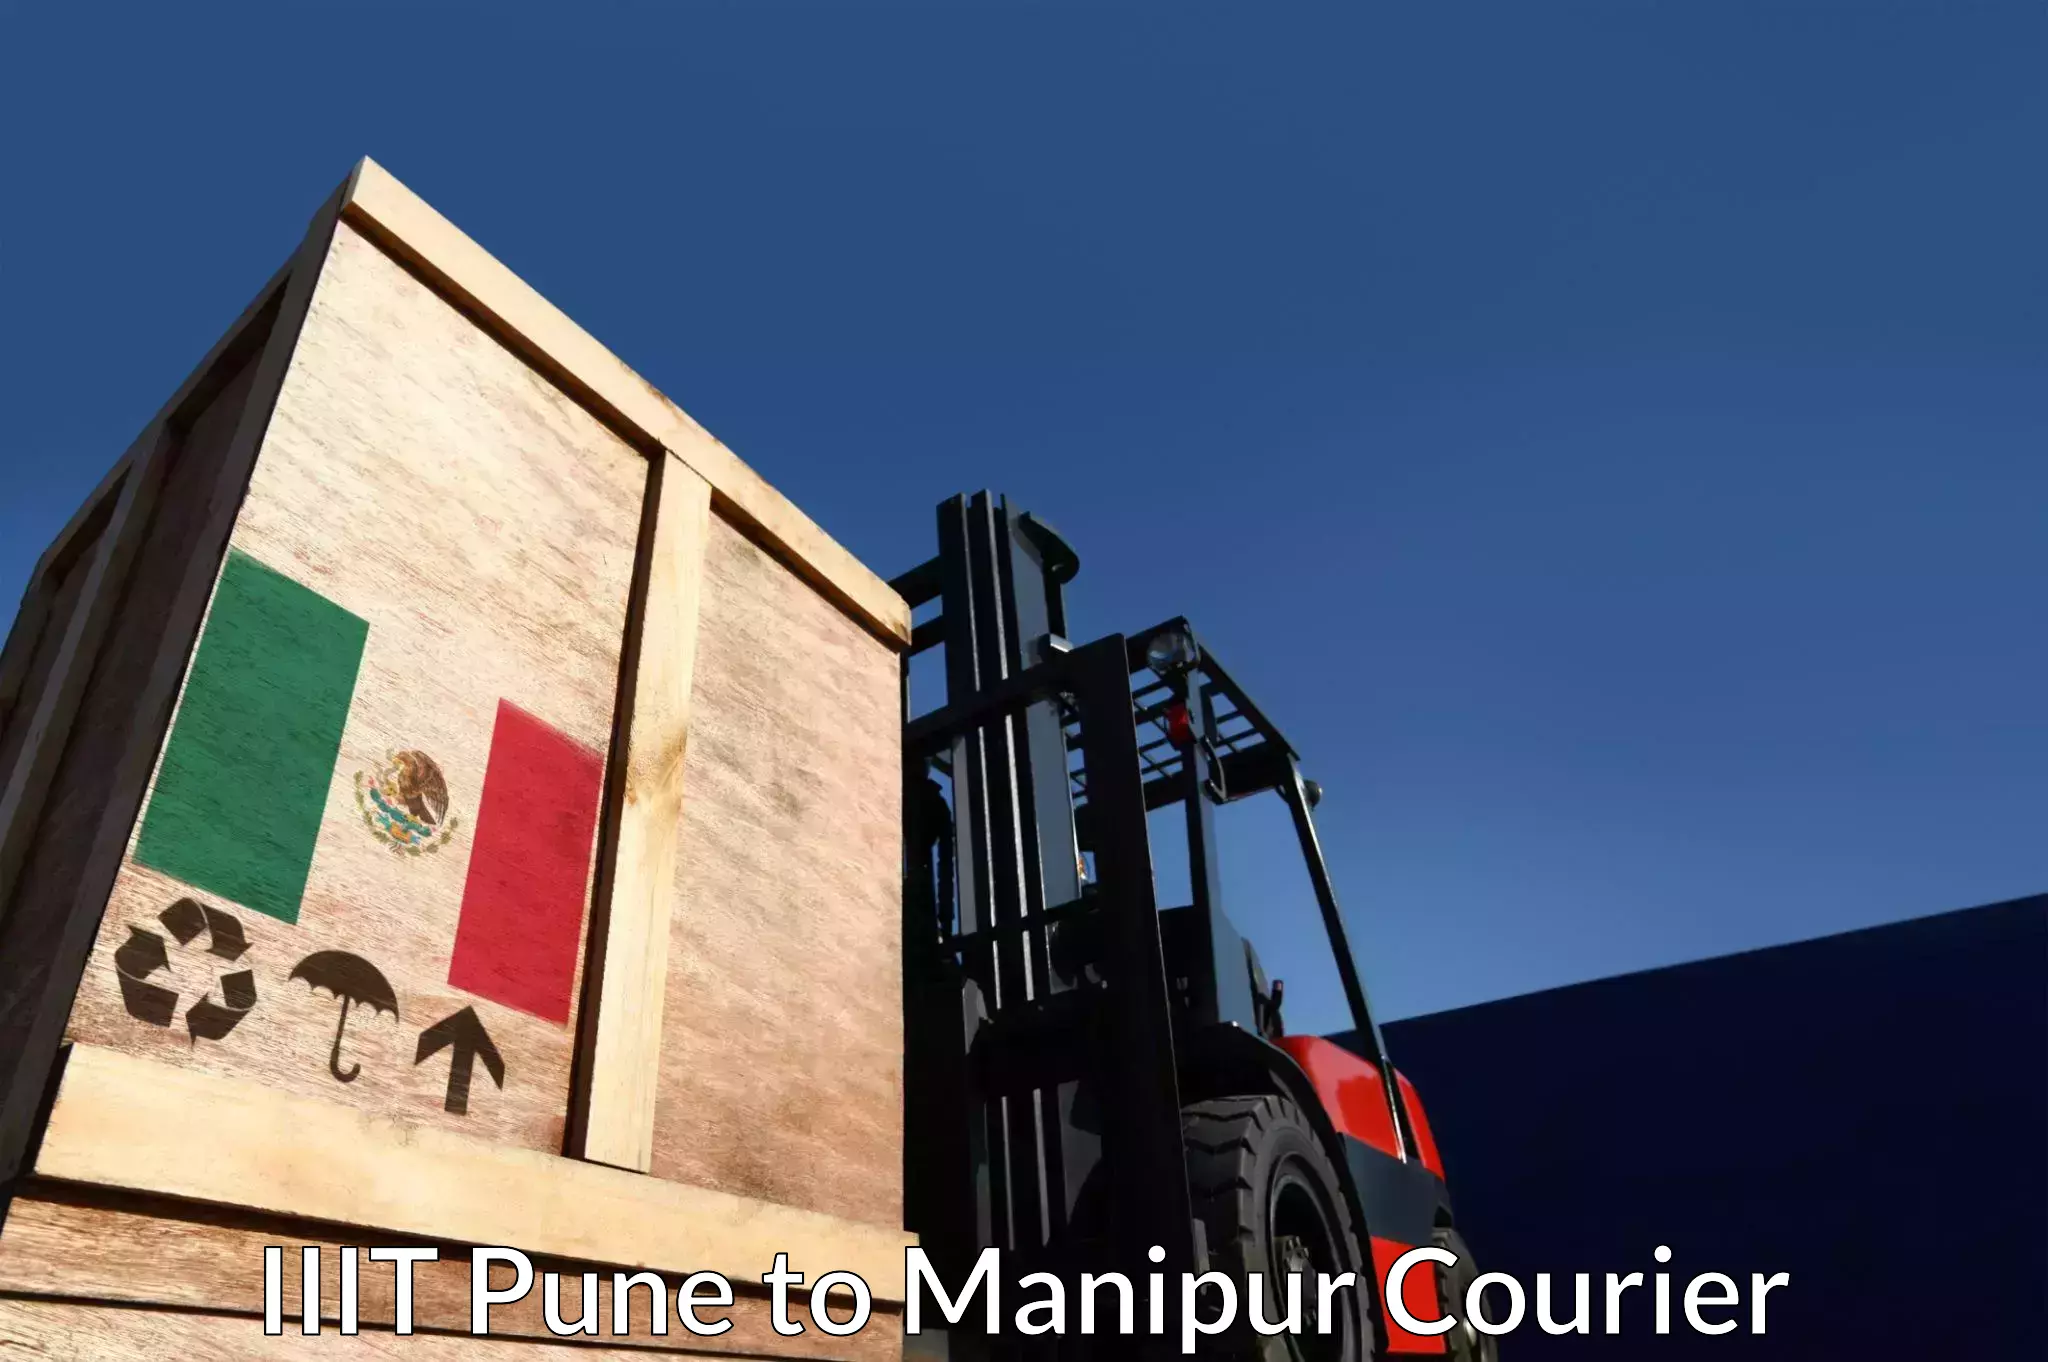 Customer-centric shipping IIIT Pune to Manipur